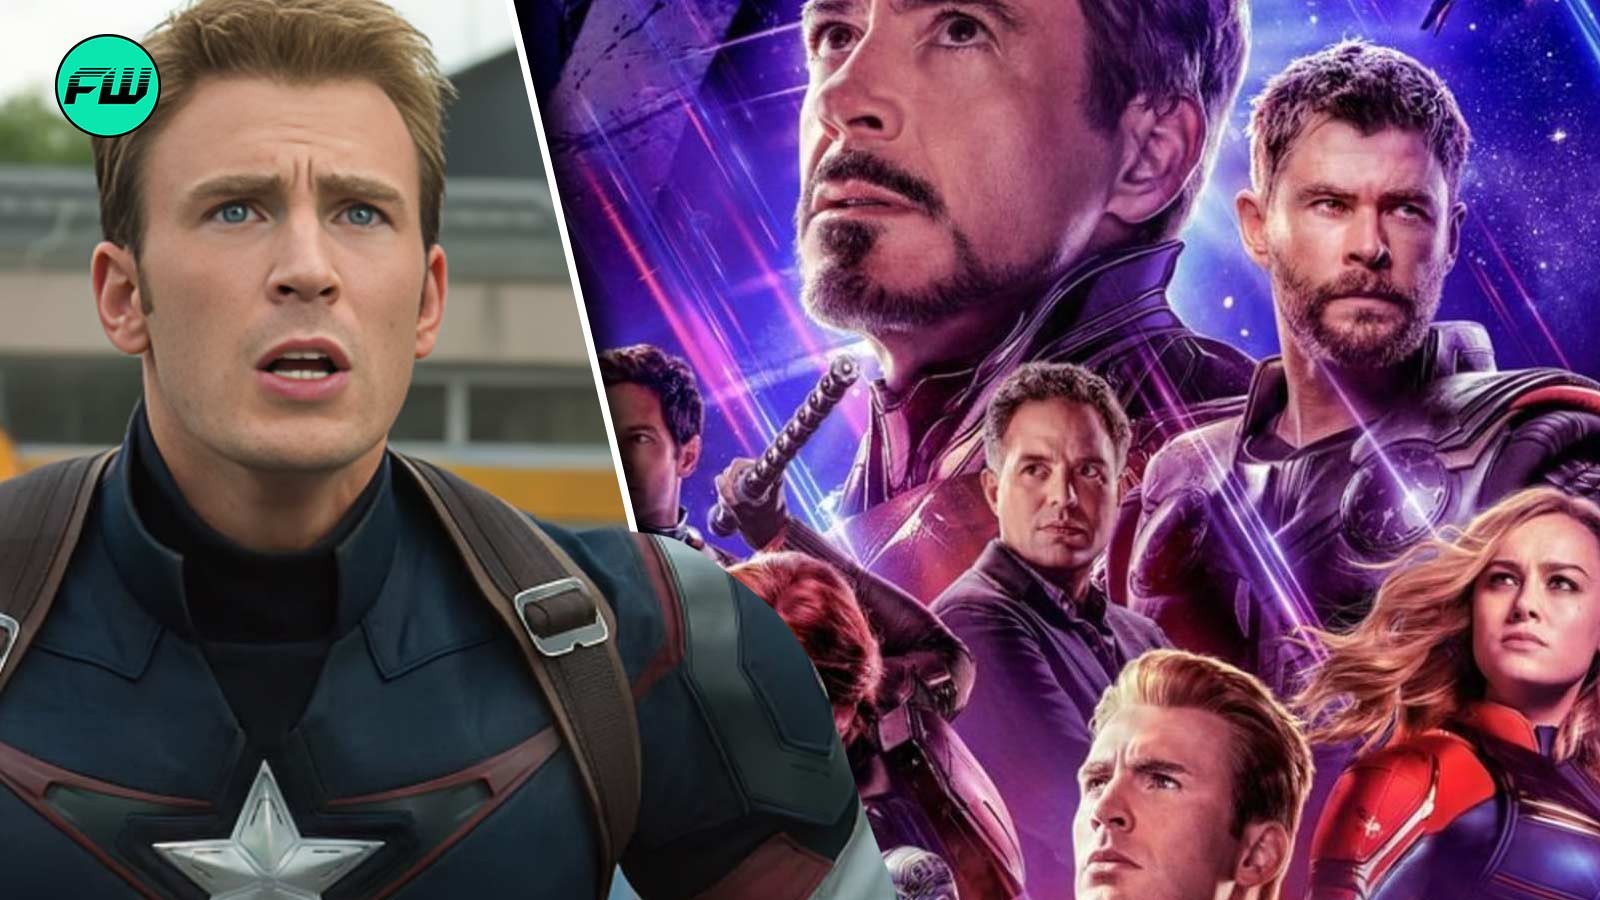 Chris Evans’ jawline posed a serious threat to The Avengers, prompting the studio to change an iconic Captain America detail